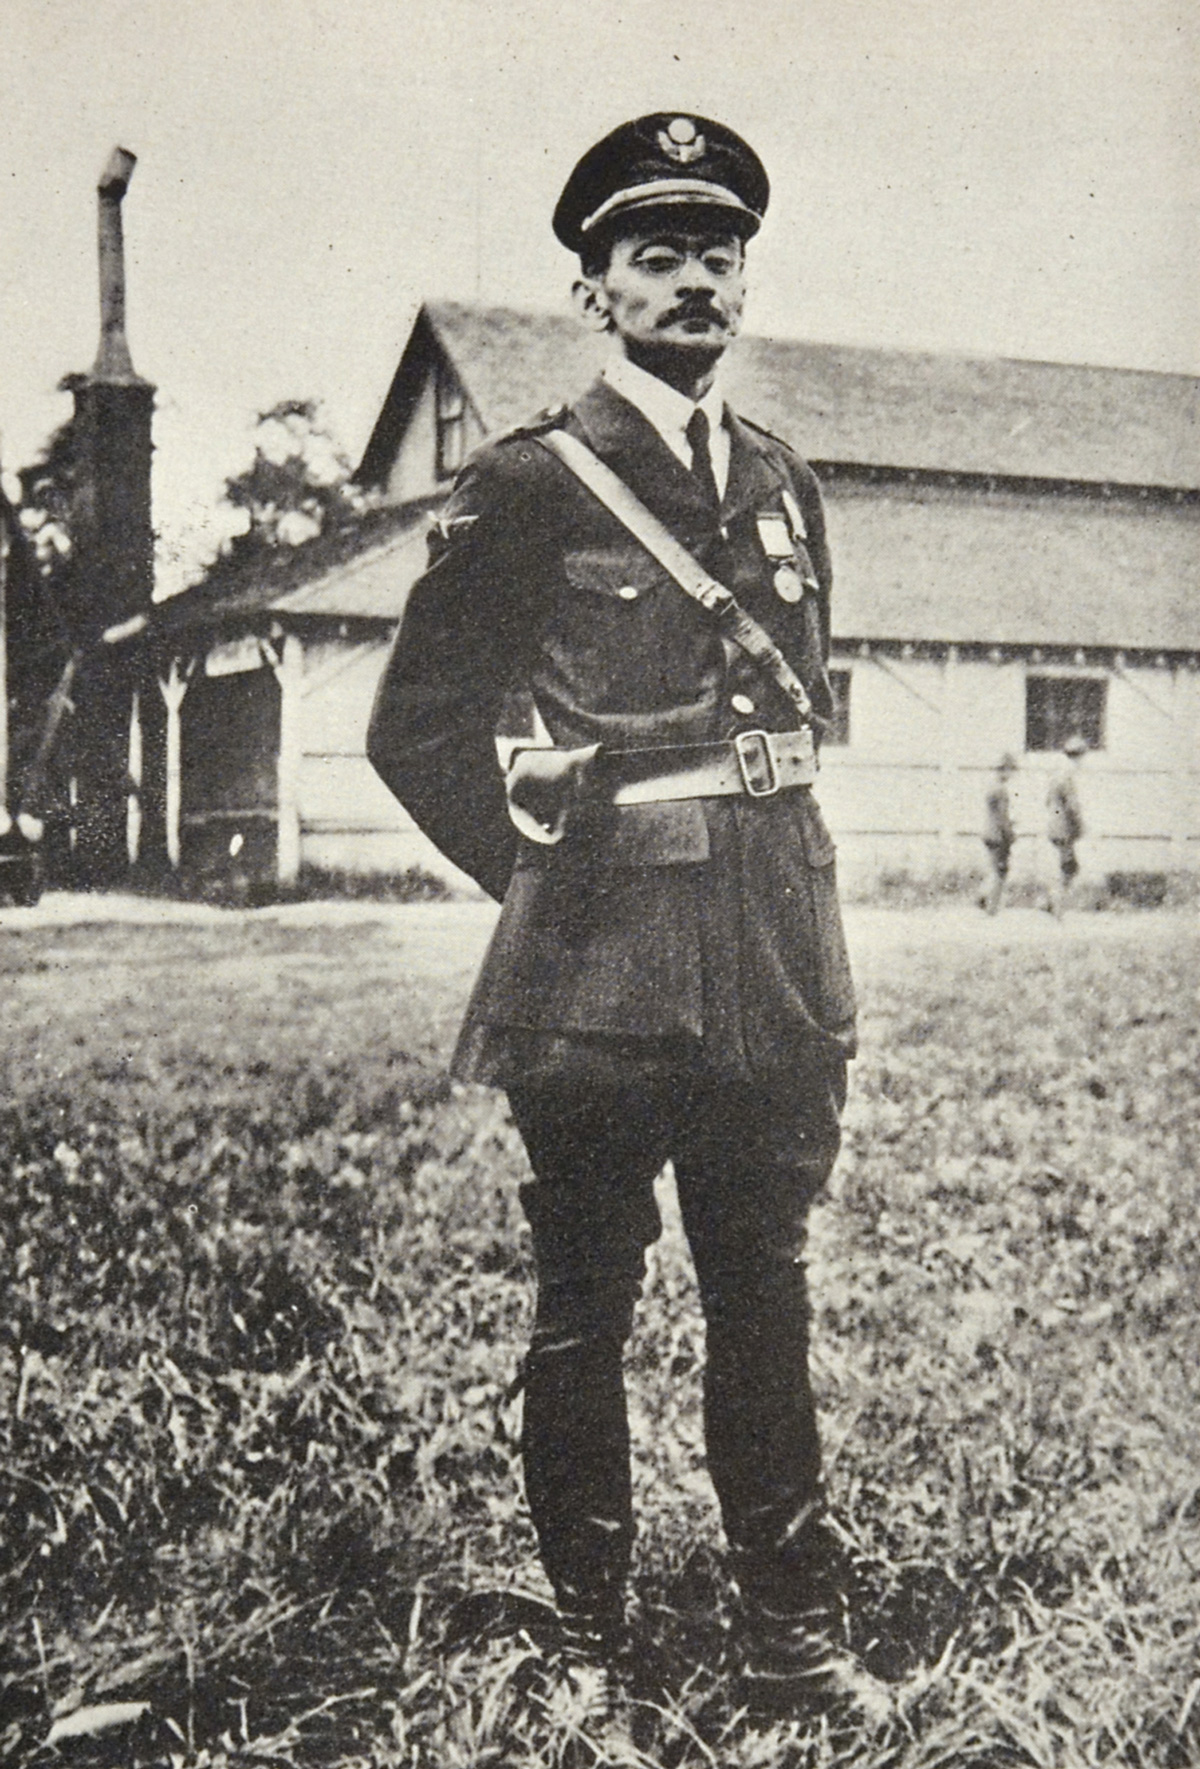 ­­­­Colonel Dinshah P. Ghadiali in his New York Police Air Reserves uniform.